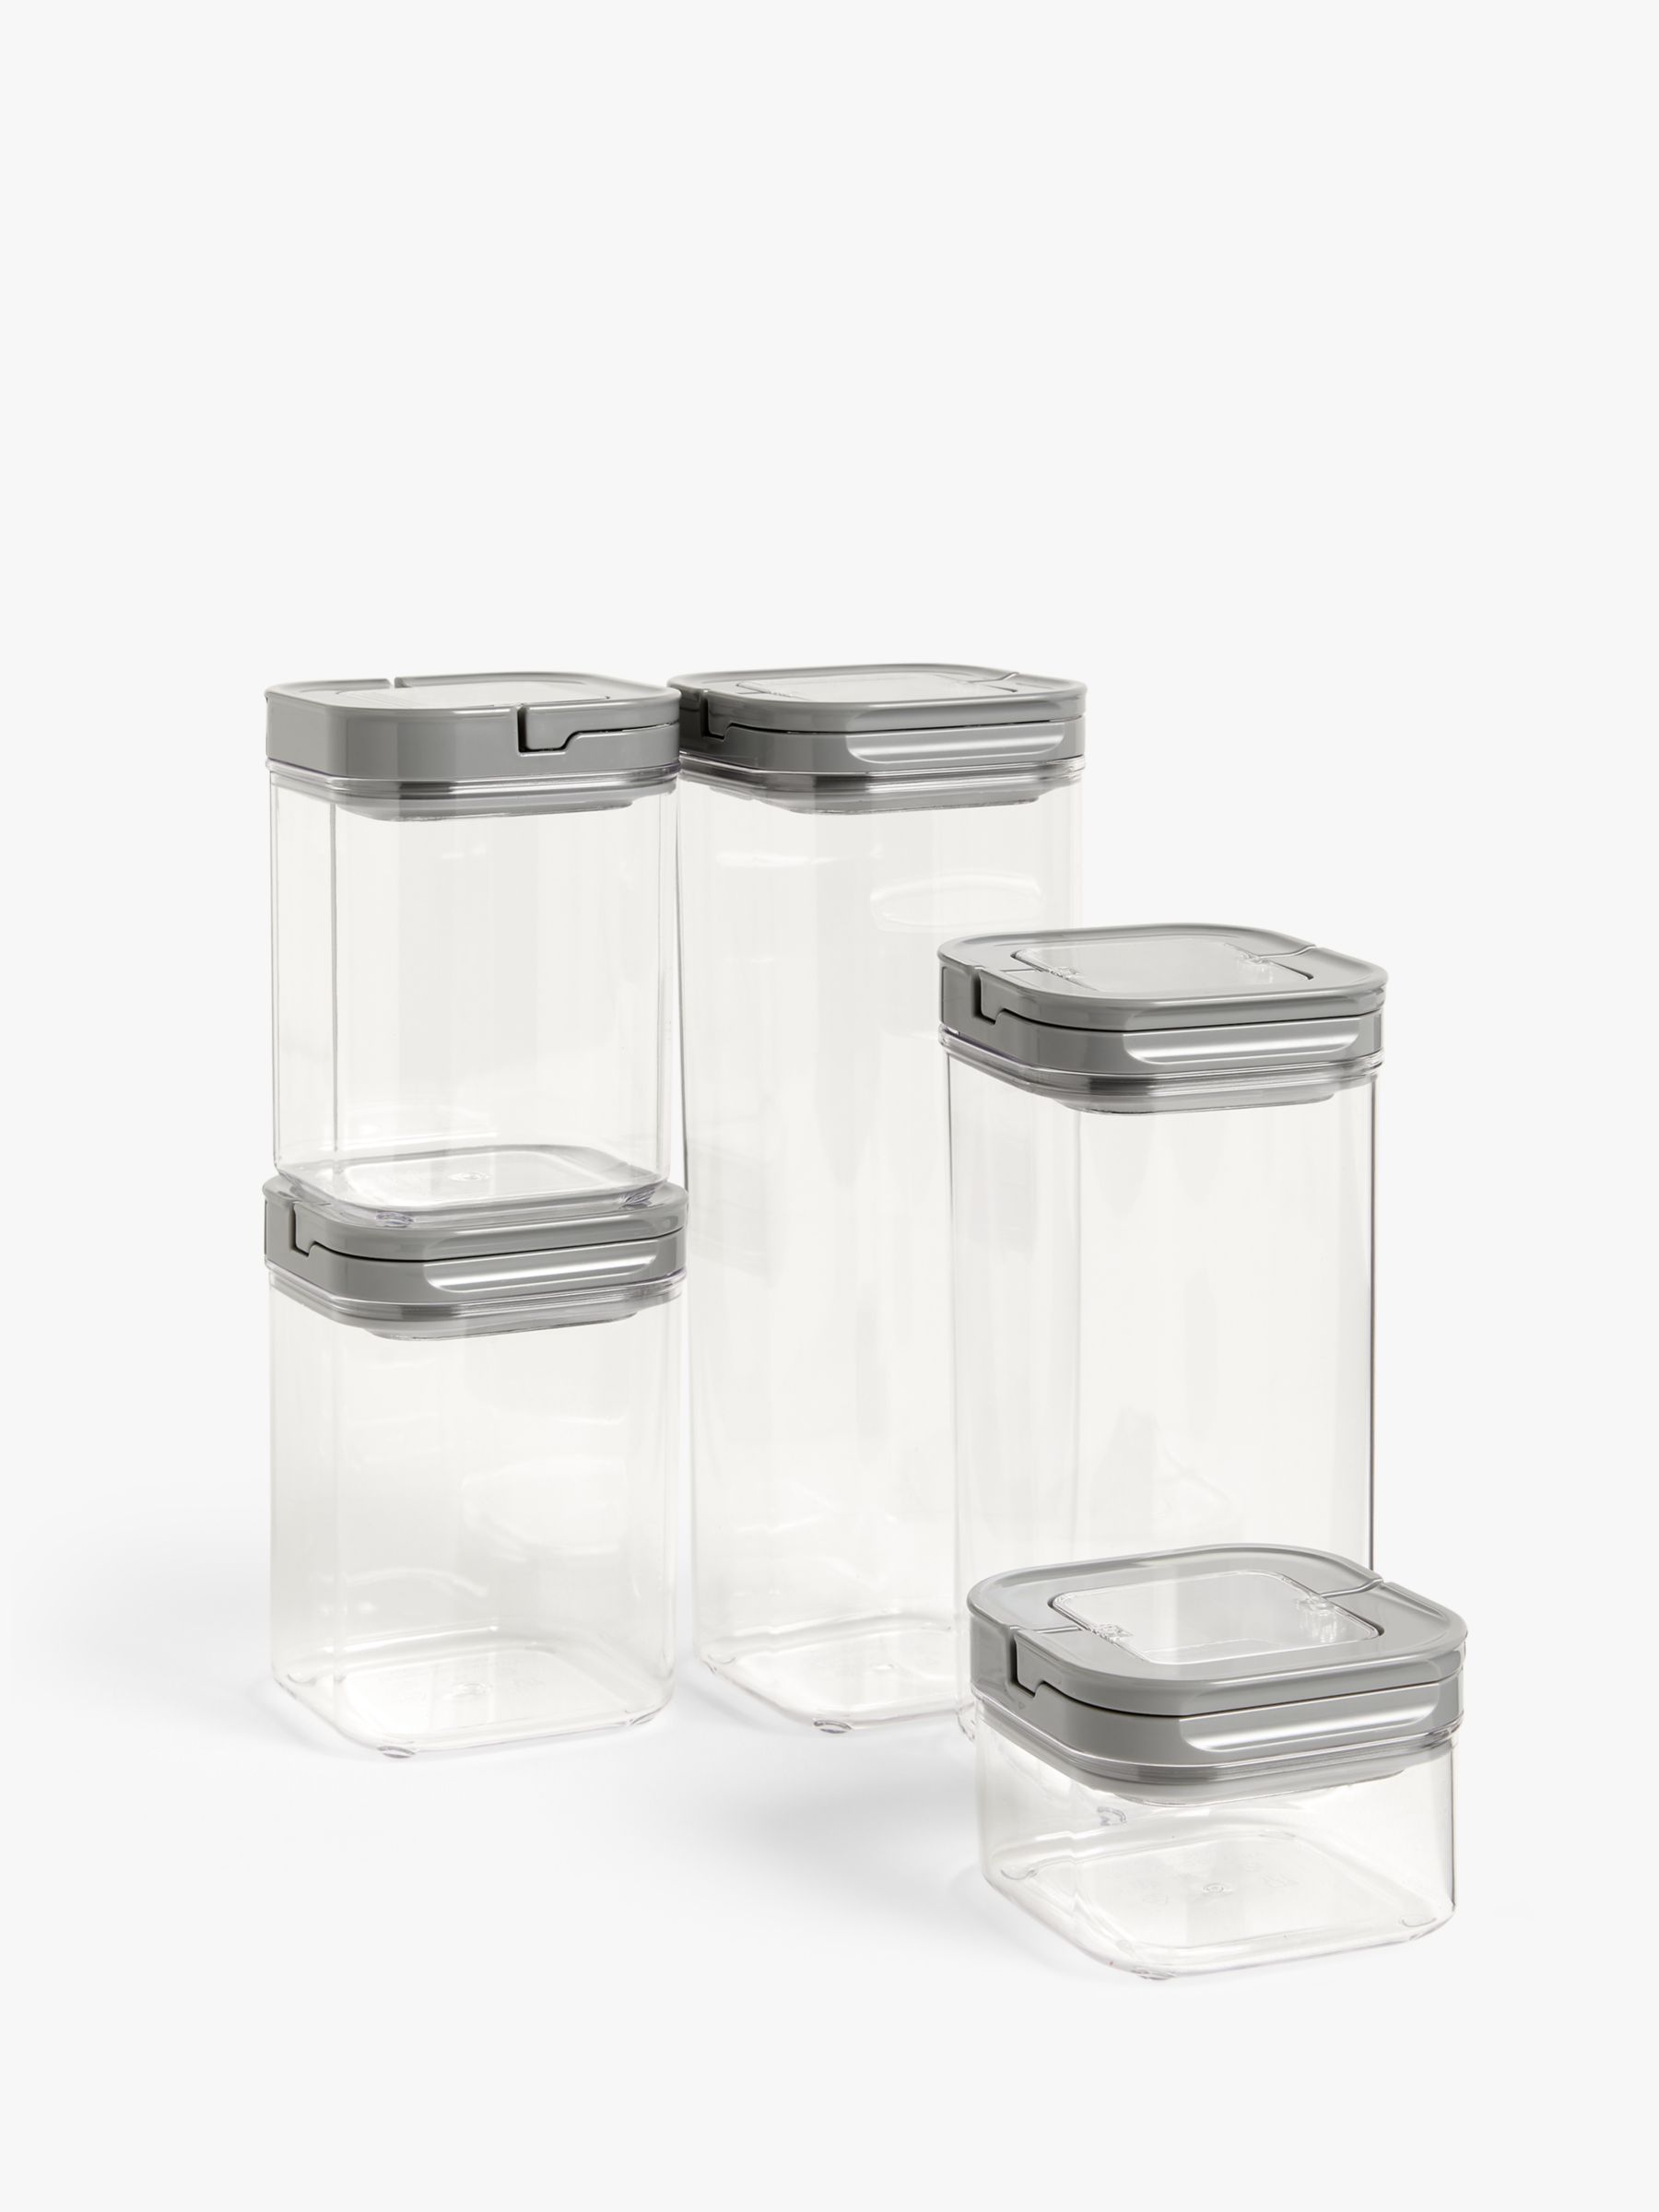 Mepal Airtight Stackable Storage Containers for Pasta & Dry